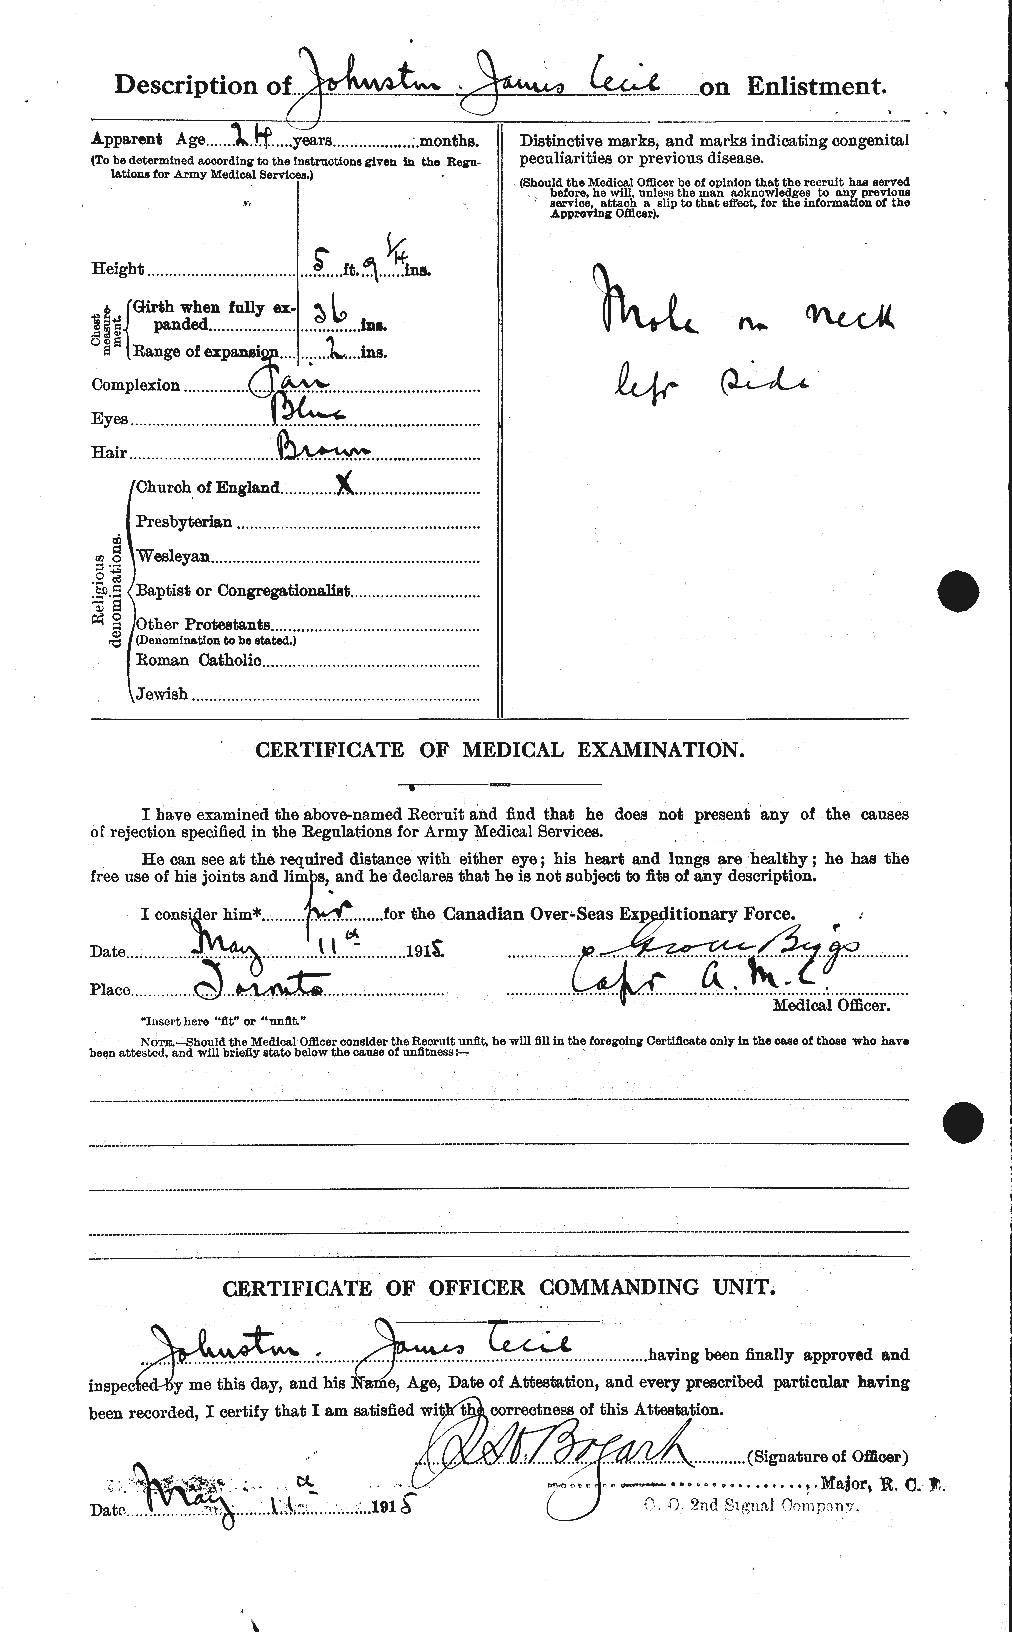 Personnel Records of the First World War - CEF 422725b